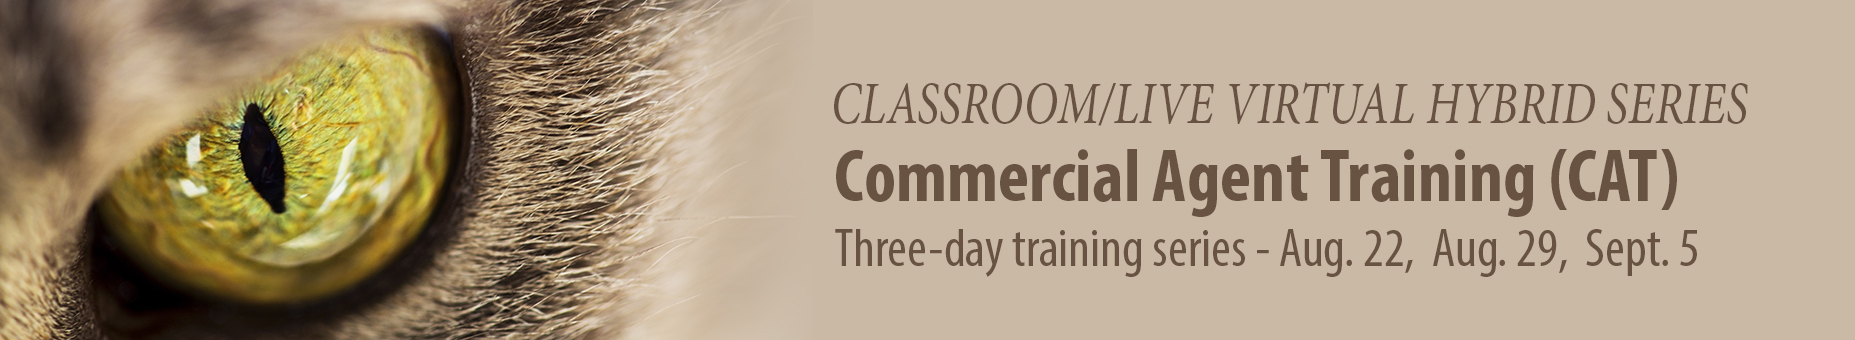 Commercial Agent Training (CAT)